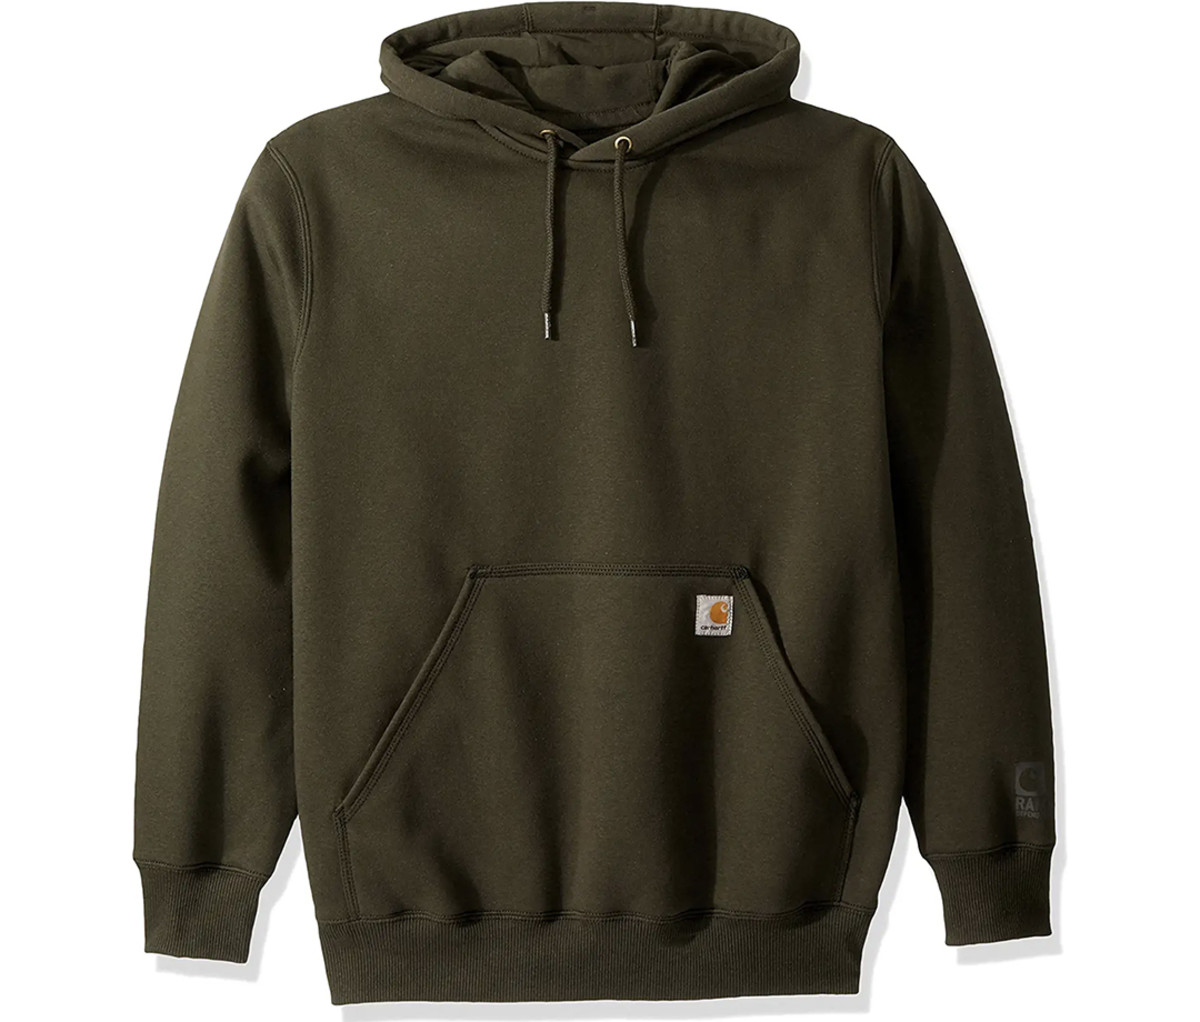 This Carhartt Midweight Hooded Sweatshirt is Another Winner for Your ...